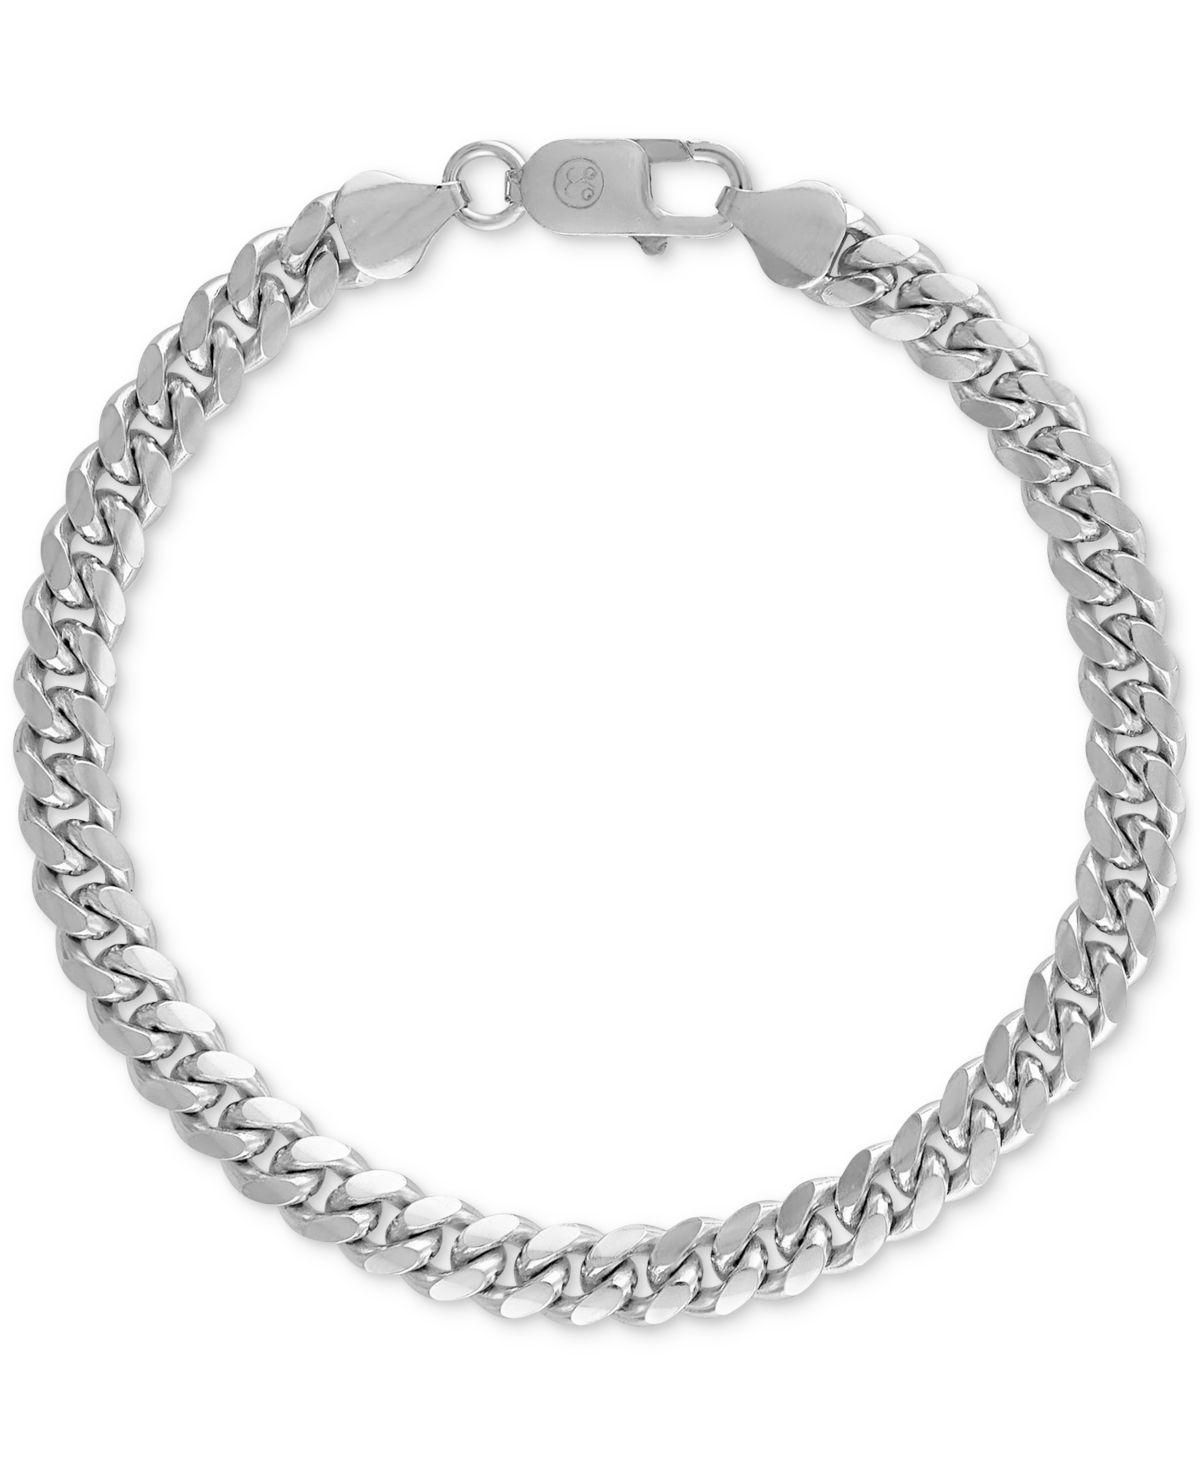 Cuban Link Chain Bracelet, Created for Macy's - Silver